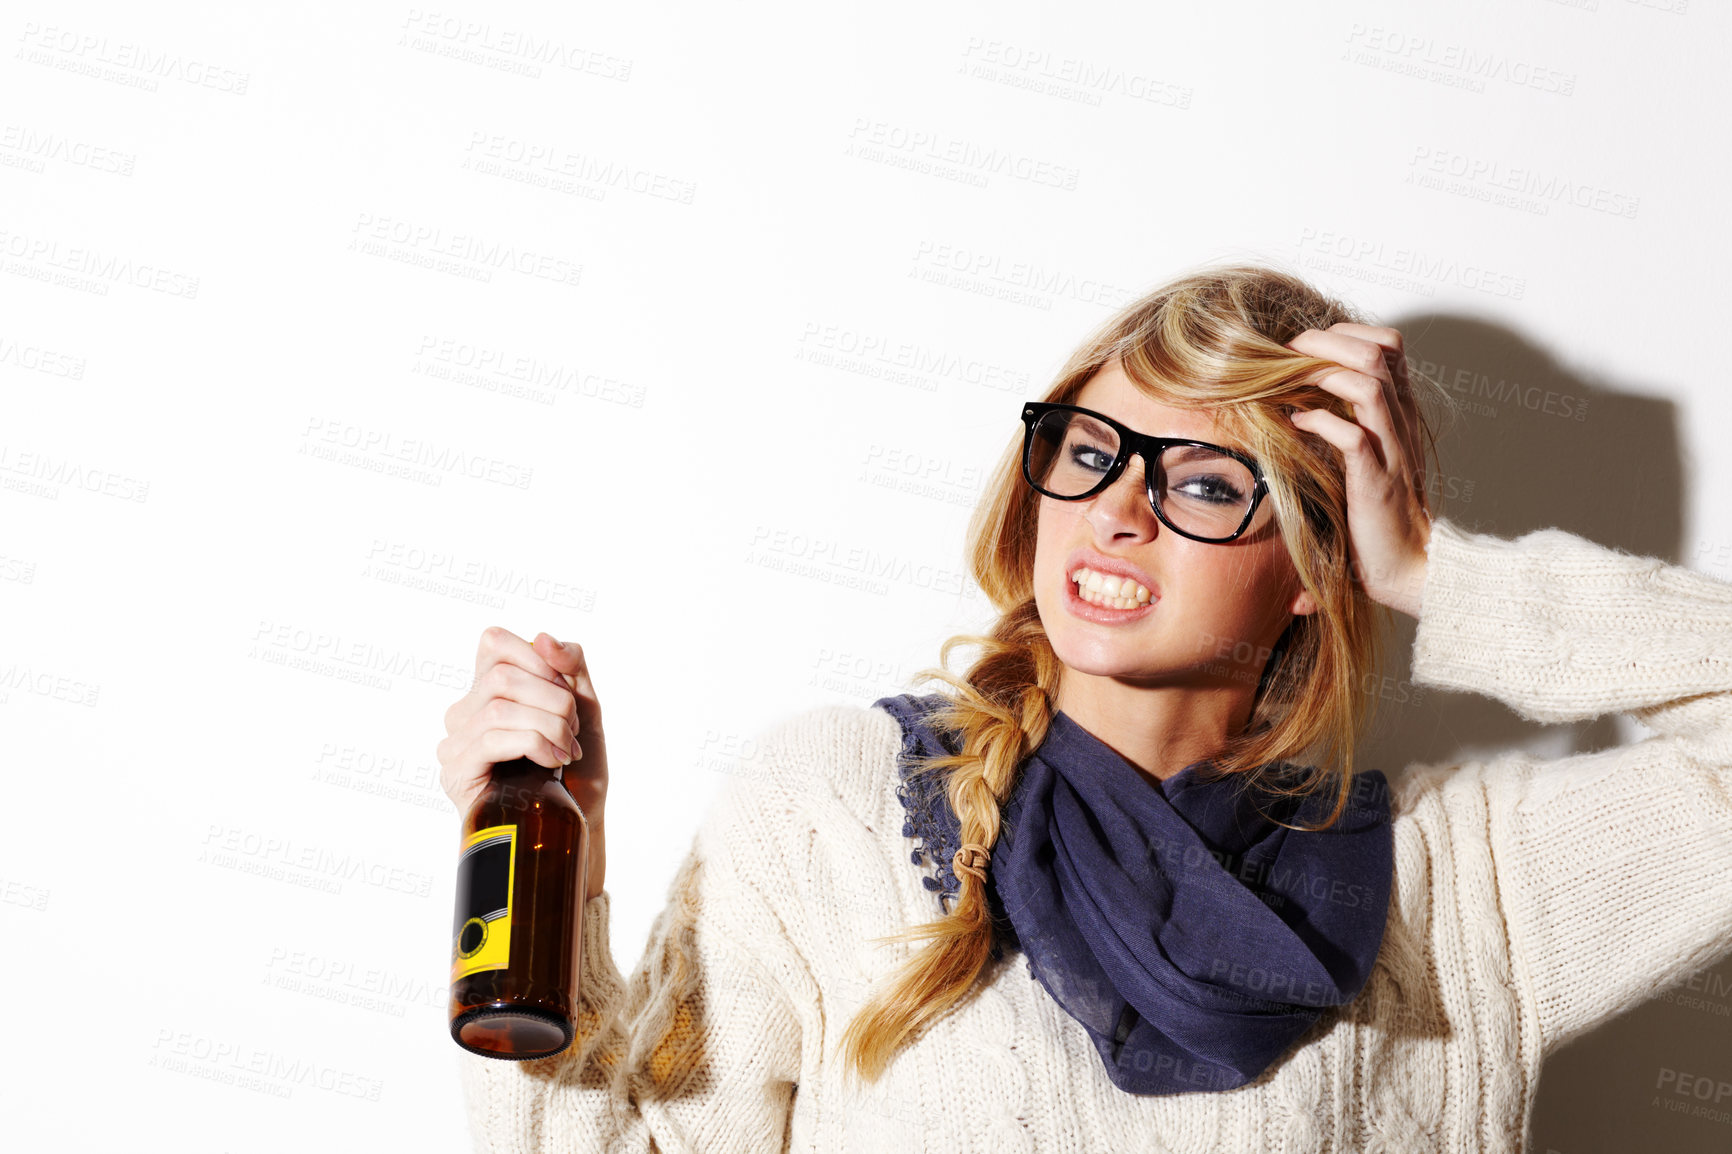 Buy stock photo Portrait, fashion and a bottle of beer with a woman in studio isolated on a white background of space for mockup. Face, alcohol and expression with a young drunk person drinking at a party or event